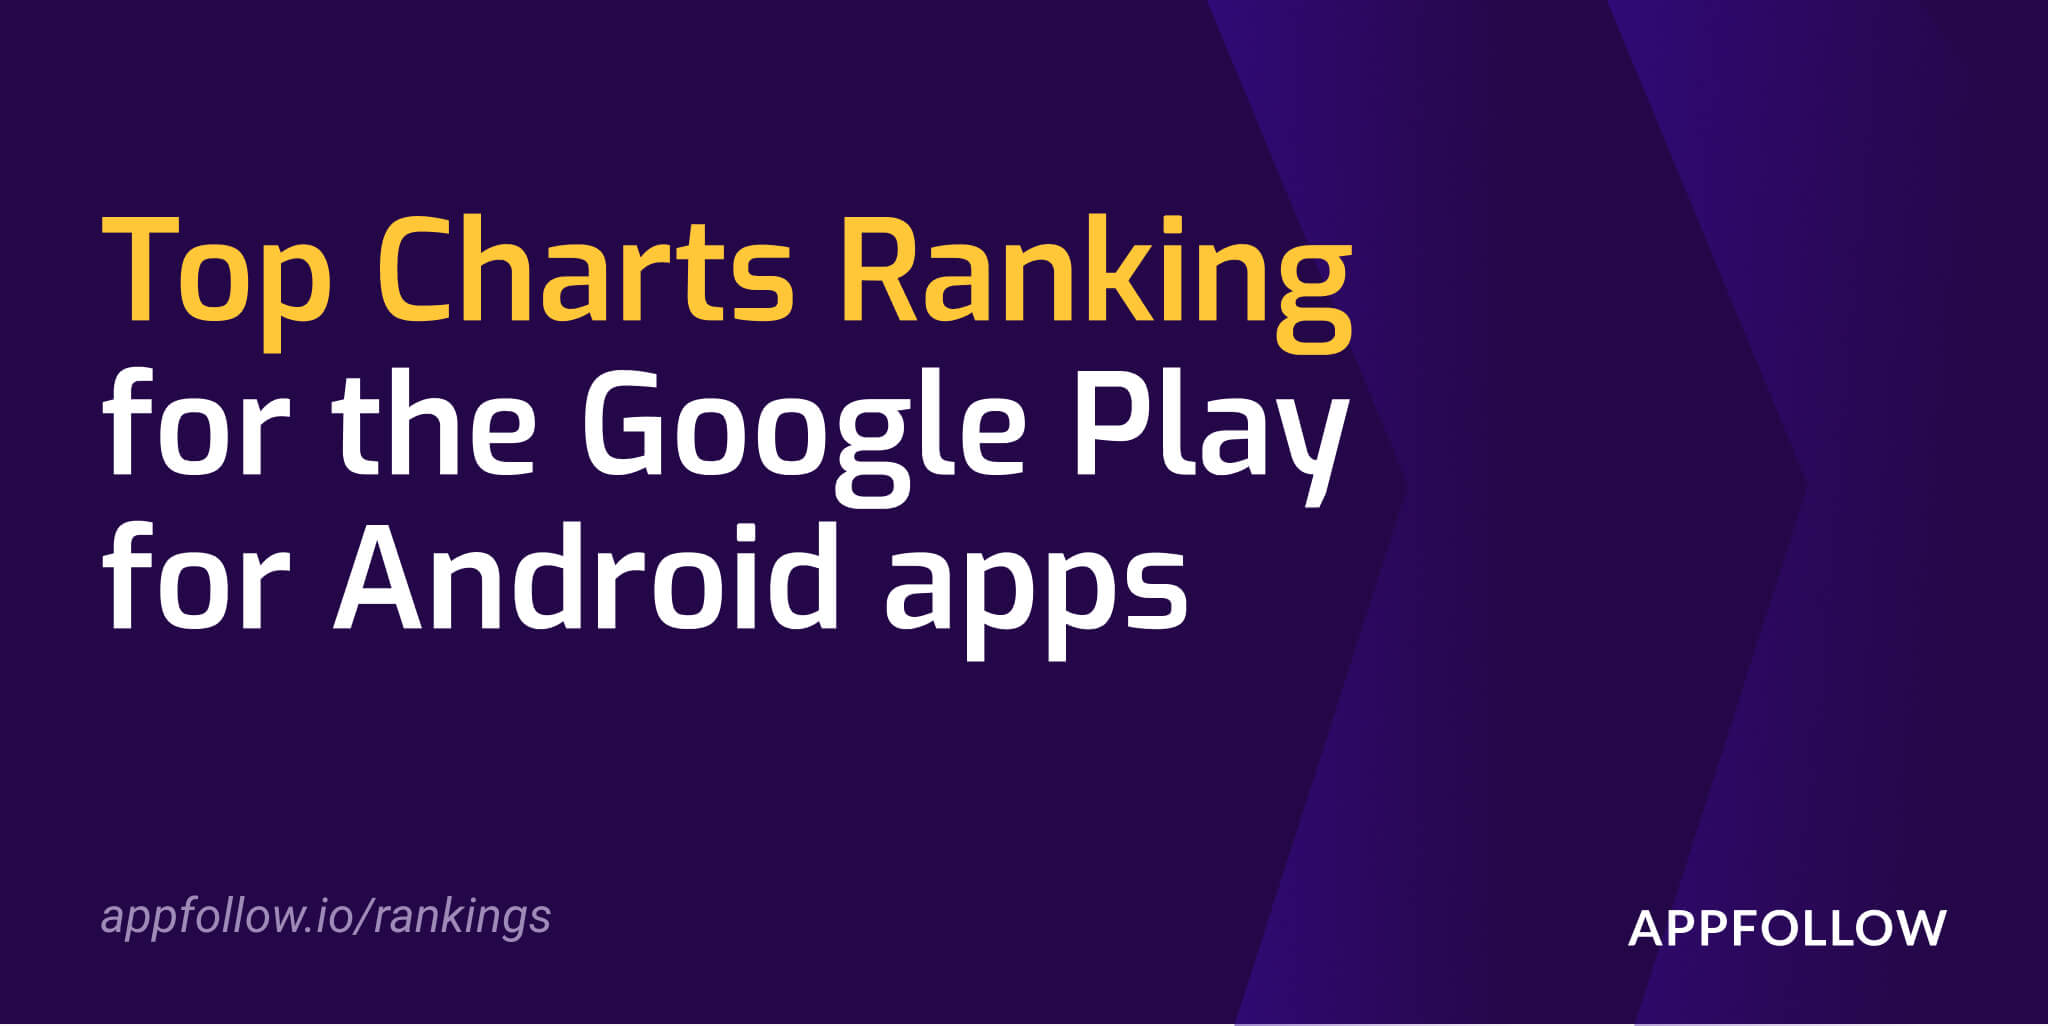 Google Play Top Charts Ranking For Android Apps Appfollow De - 4 younow live roblox free robux hack ipad